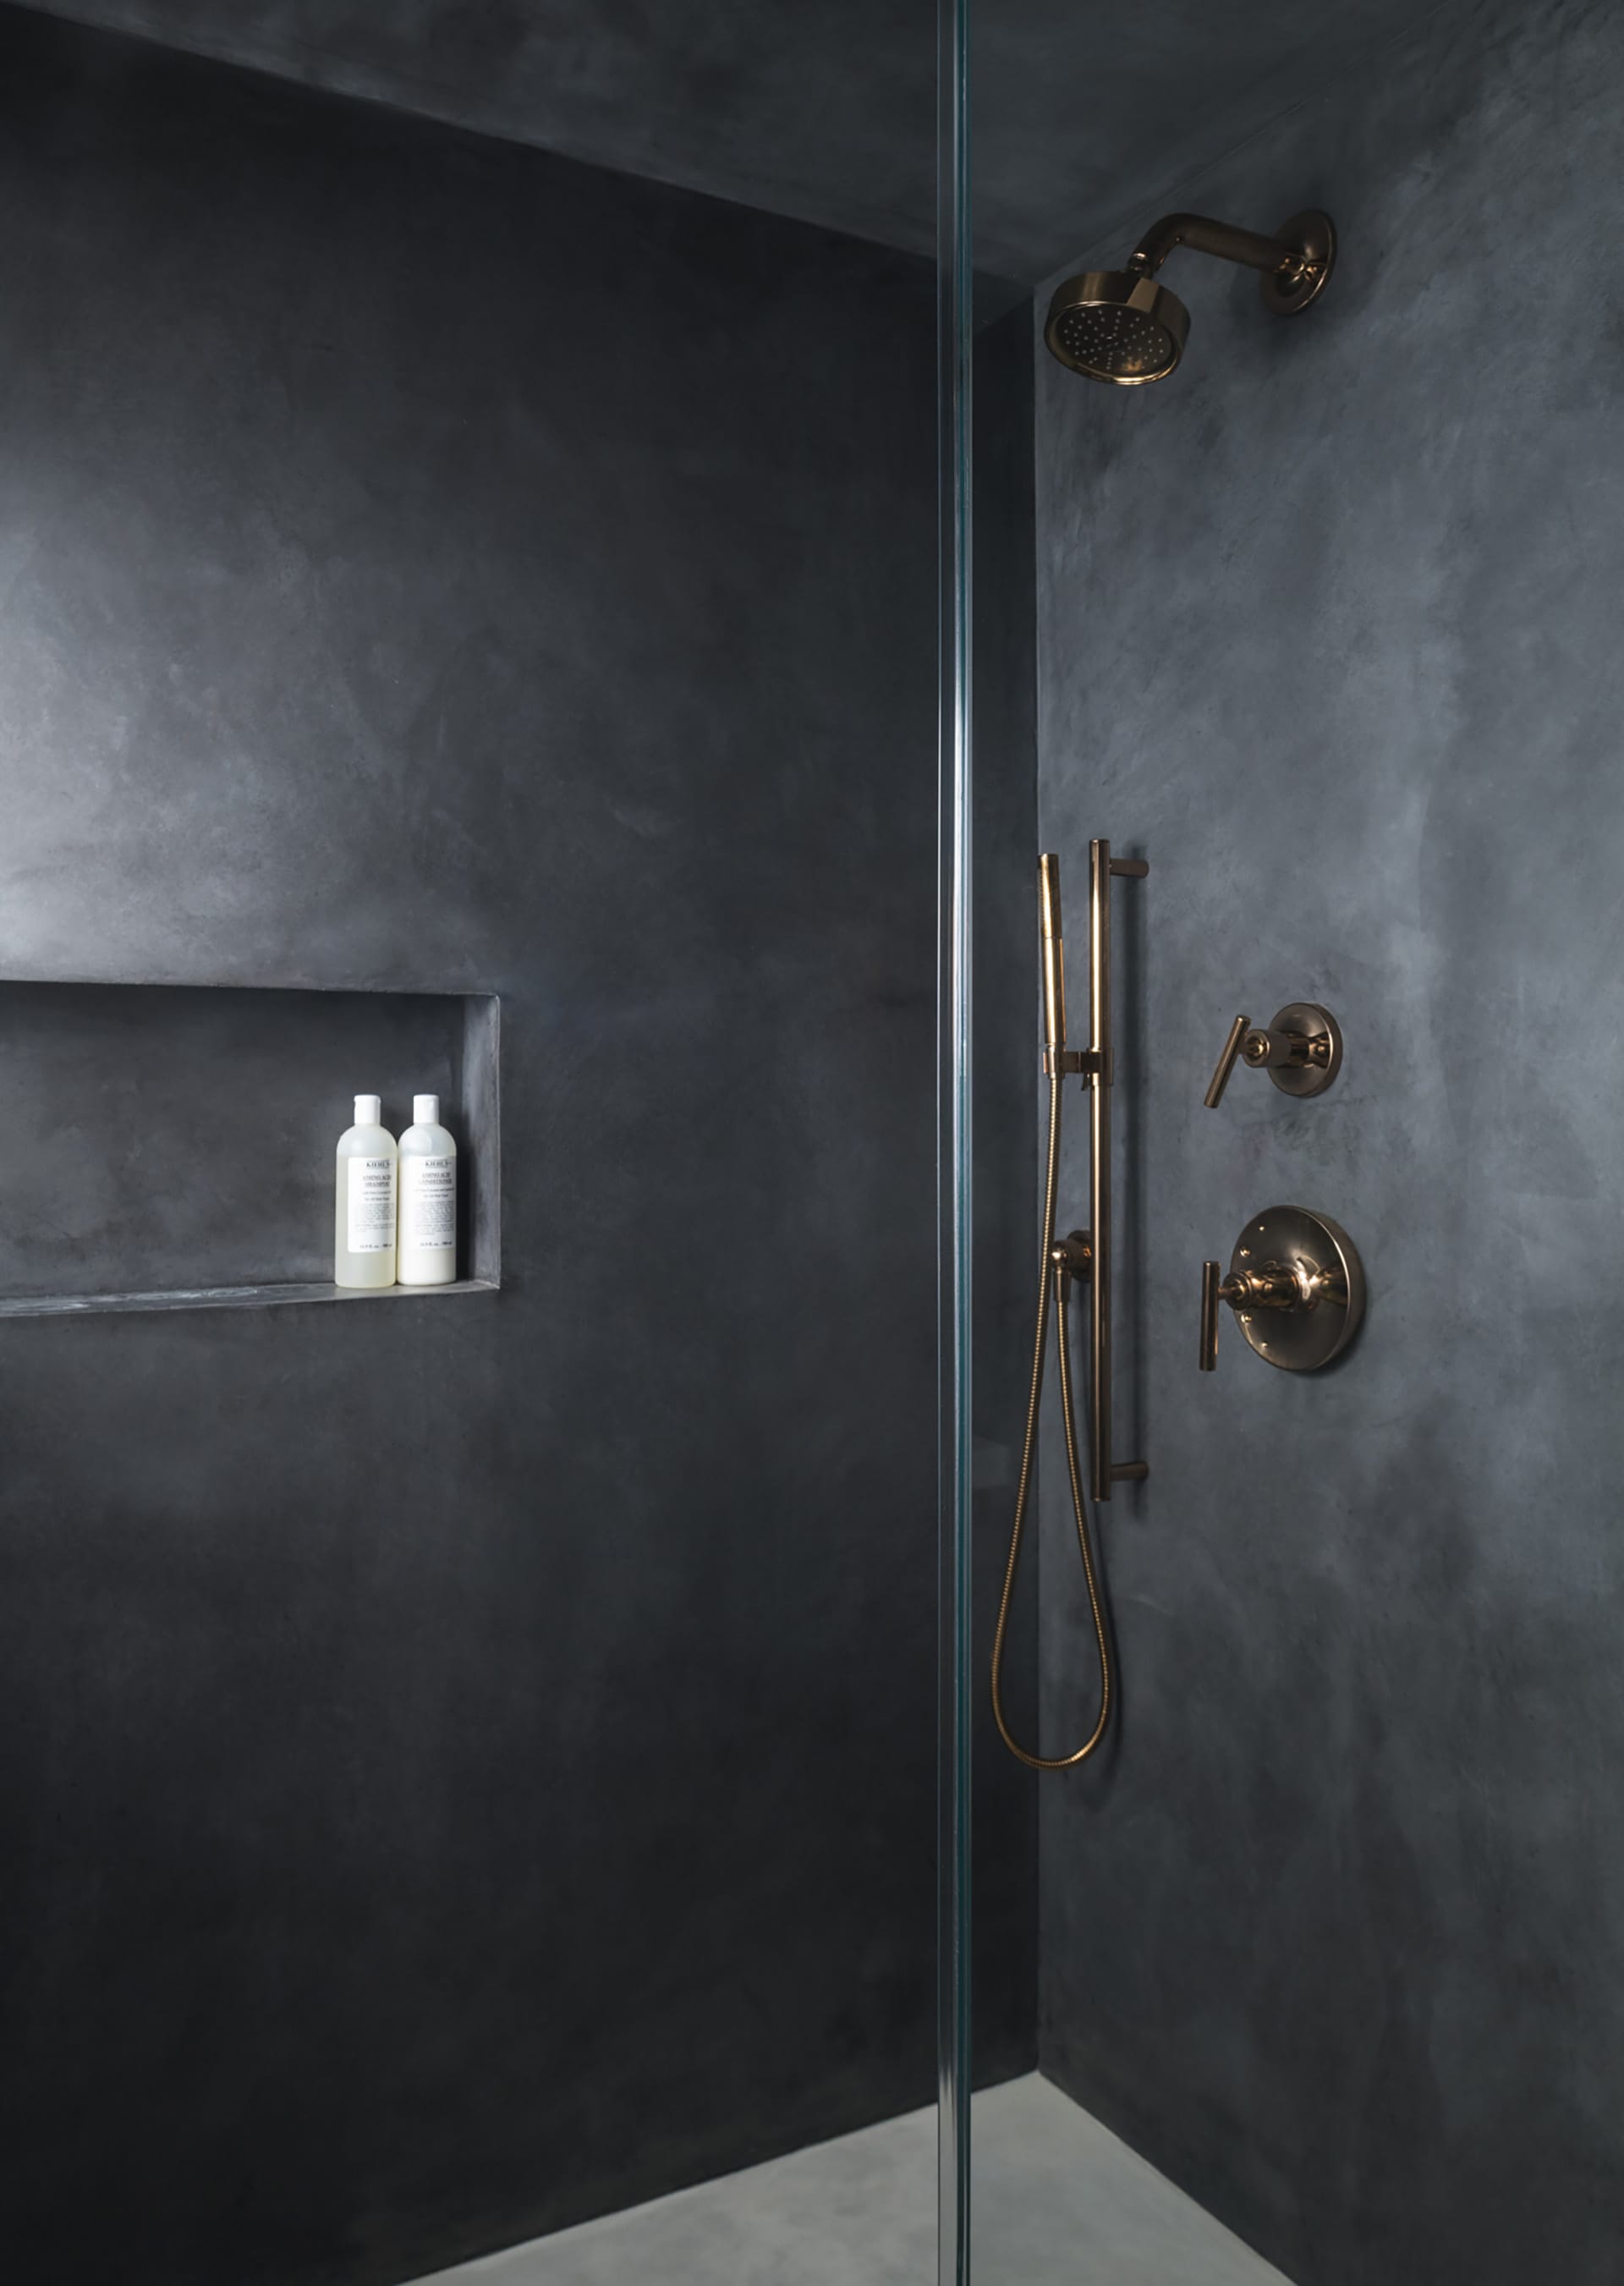 Guest shower with rose gold fixtures and Cementous walls